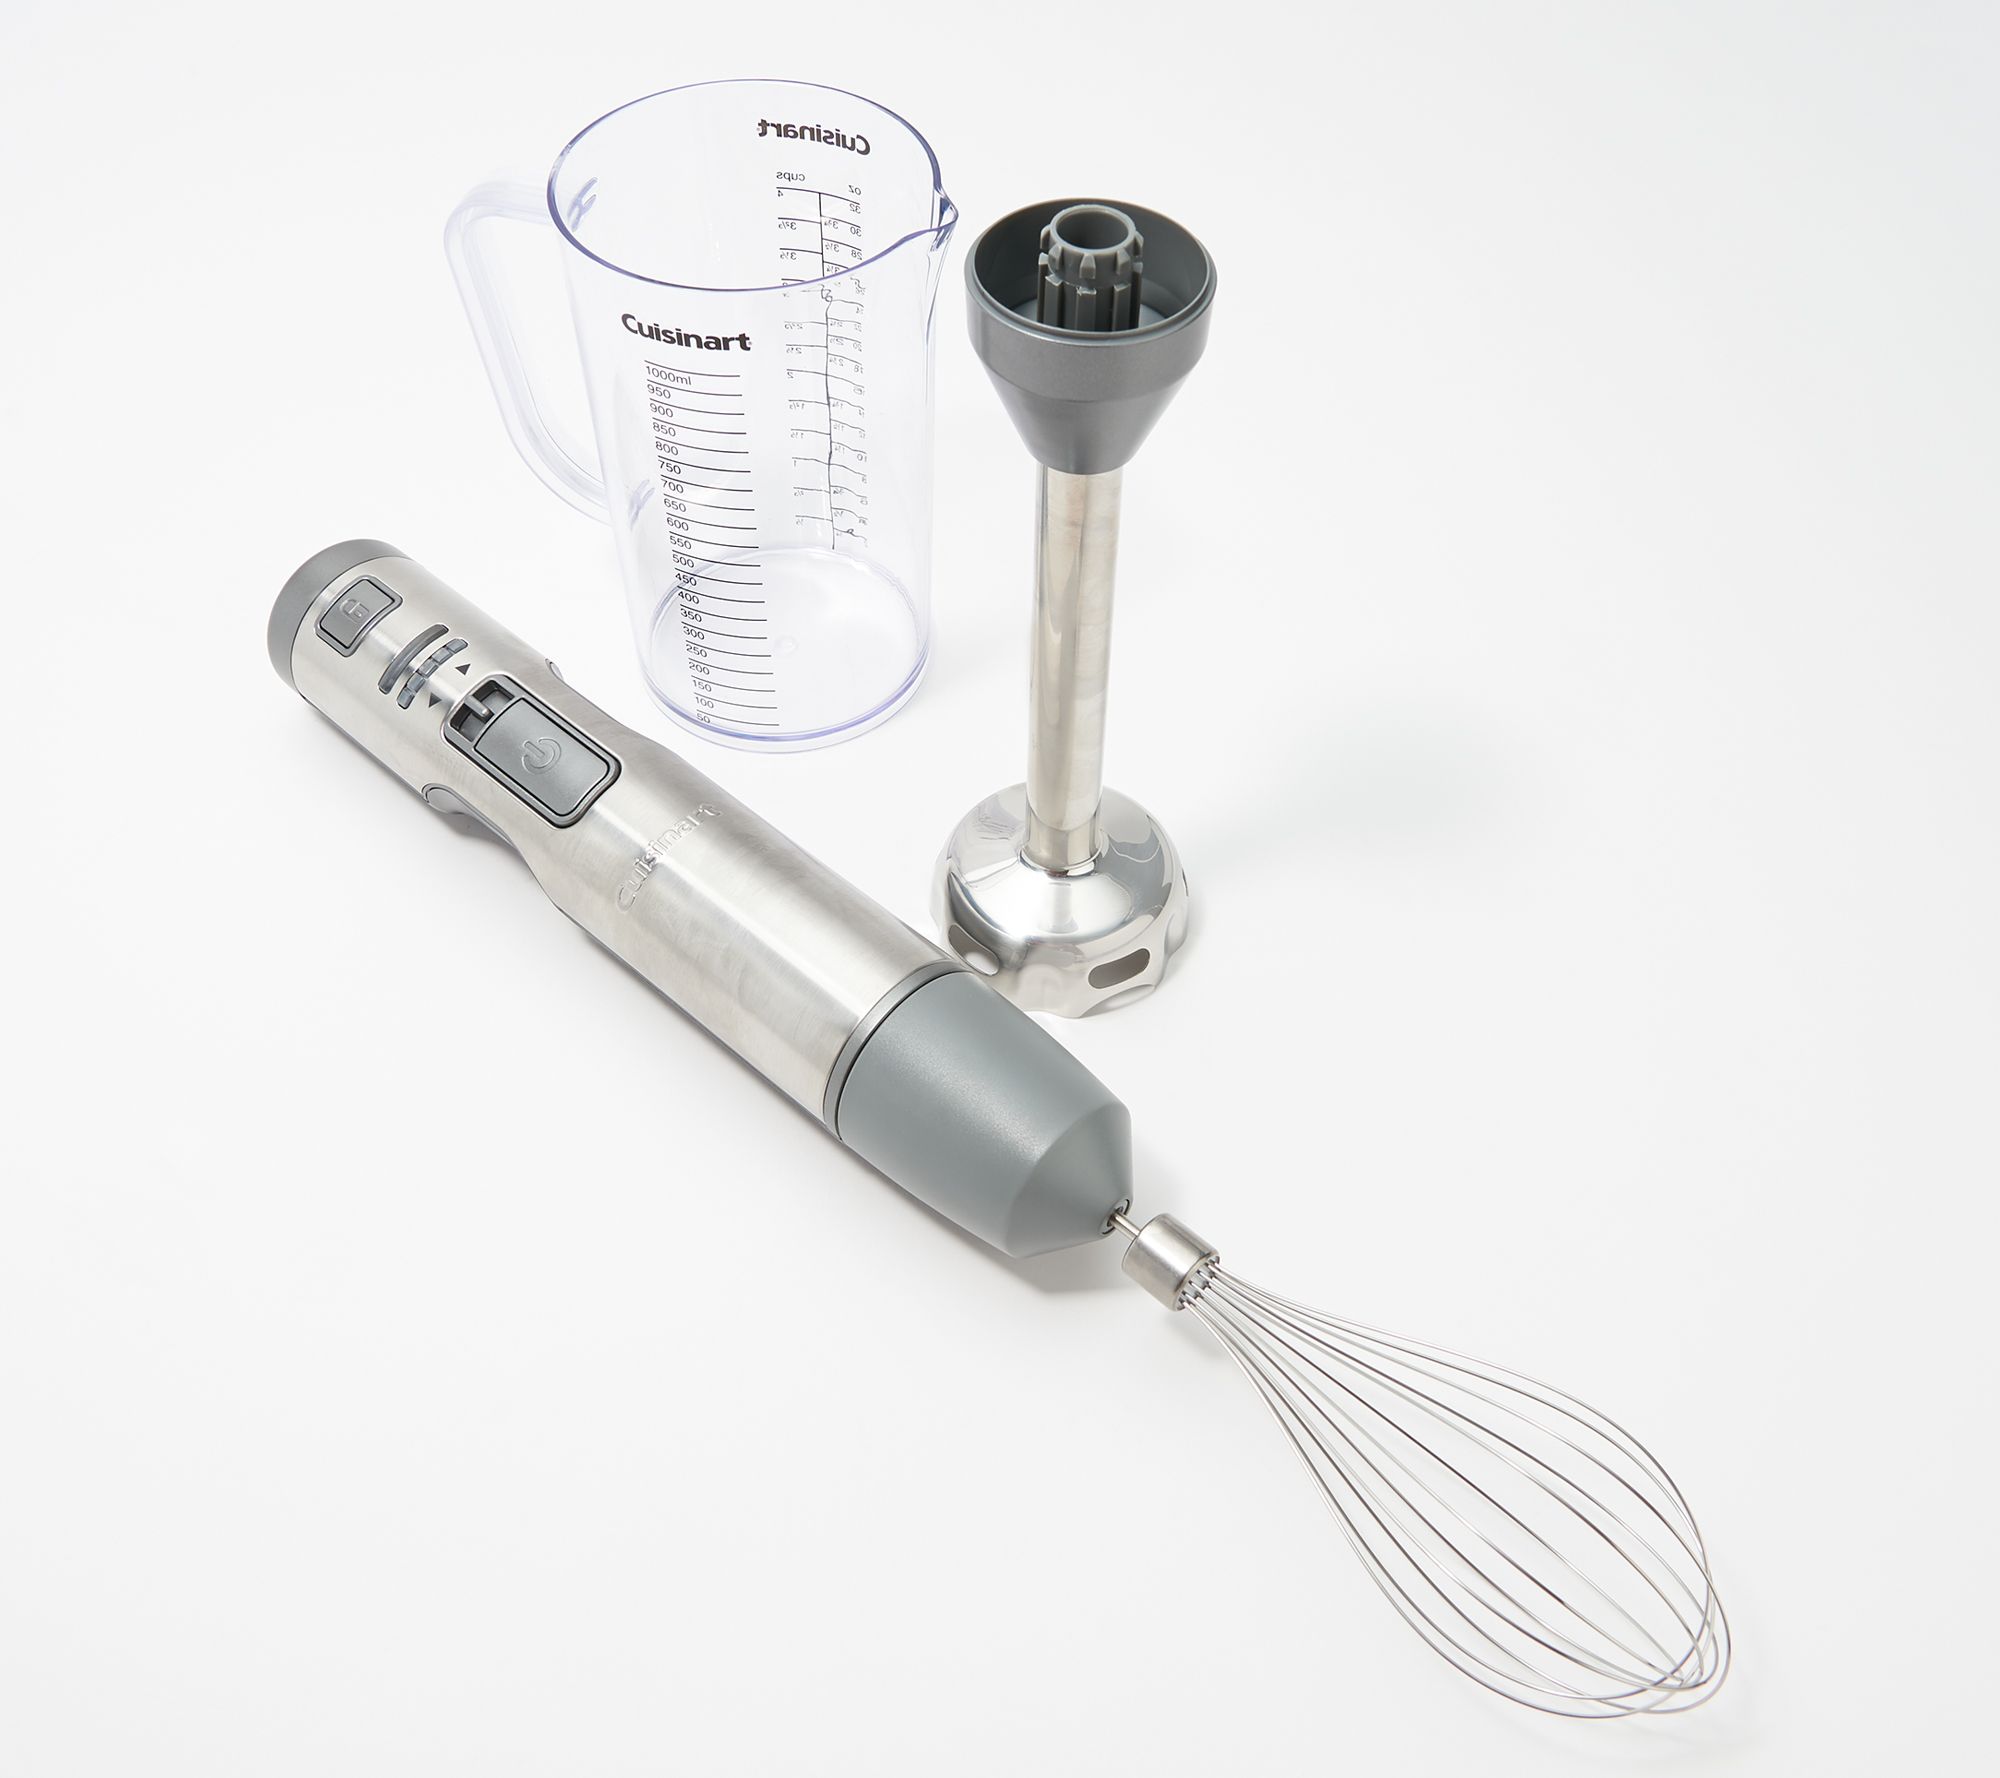 Grab this top-rated Cuisinart cordless immersion blender that